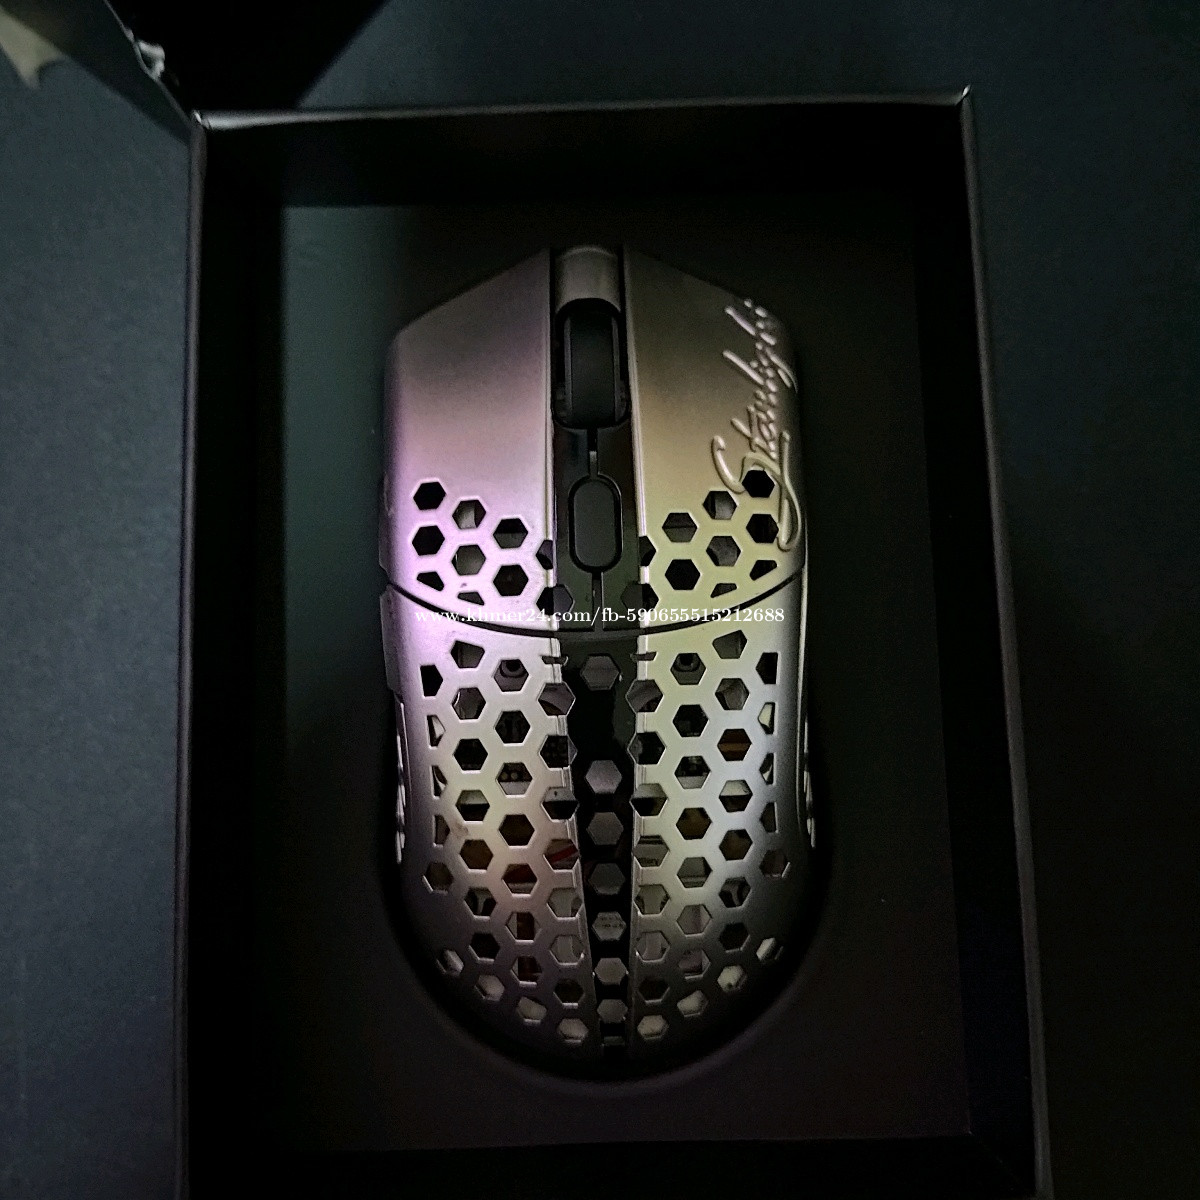 Finalmouse Tenz S Price $200.00 in Stueng Mean chey 1, Cambodia